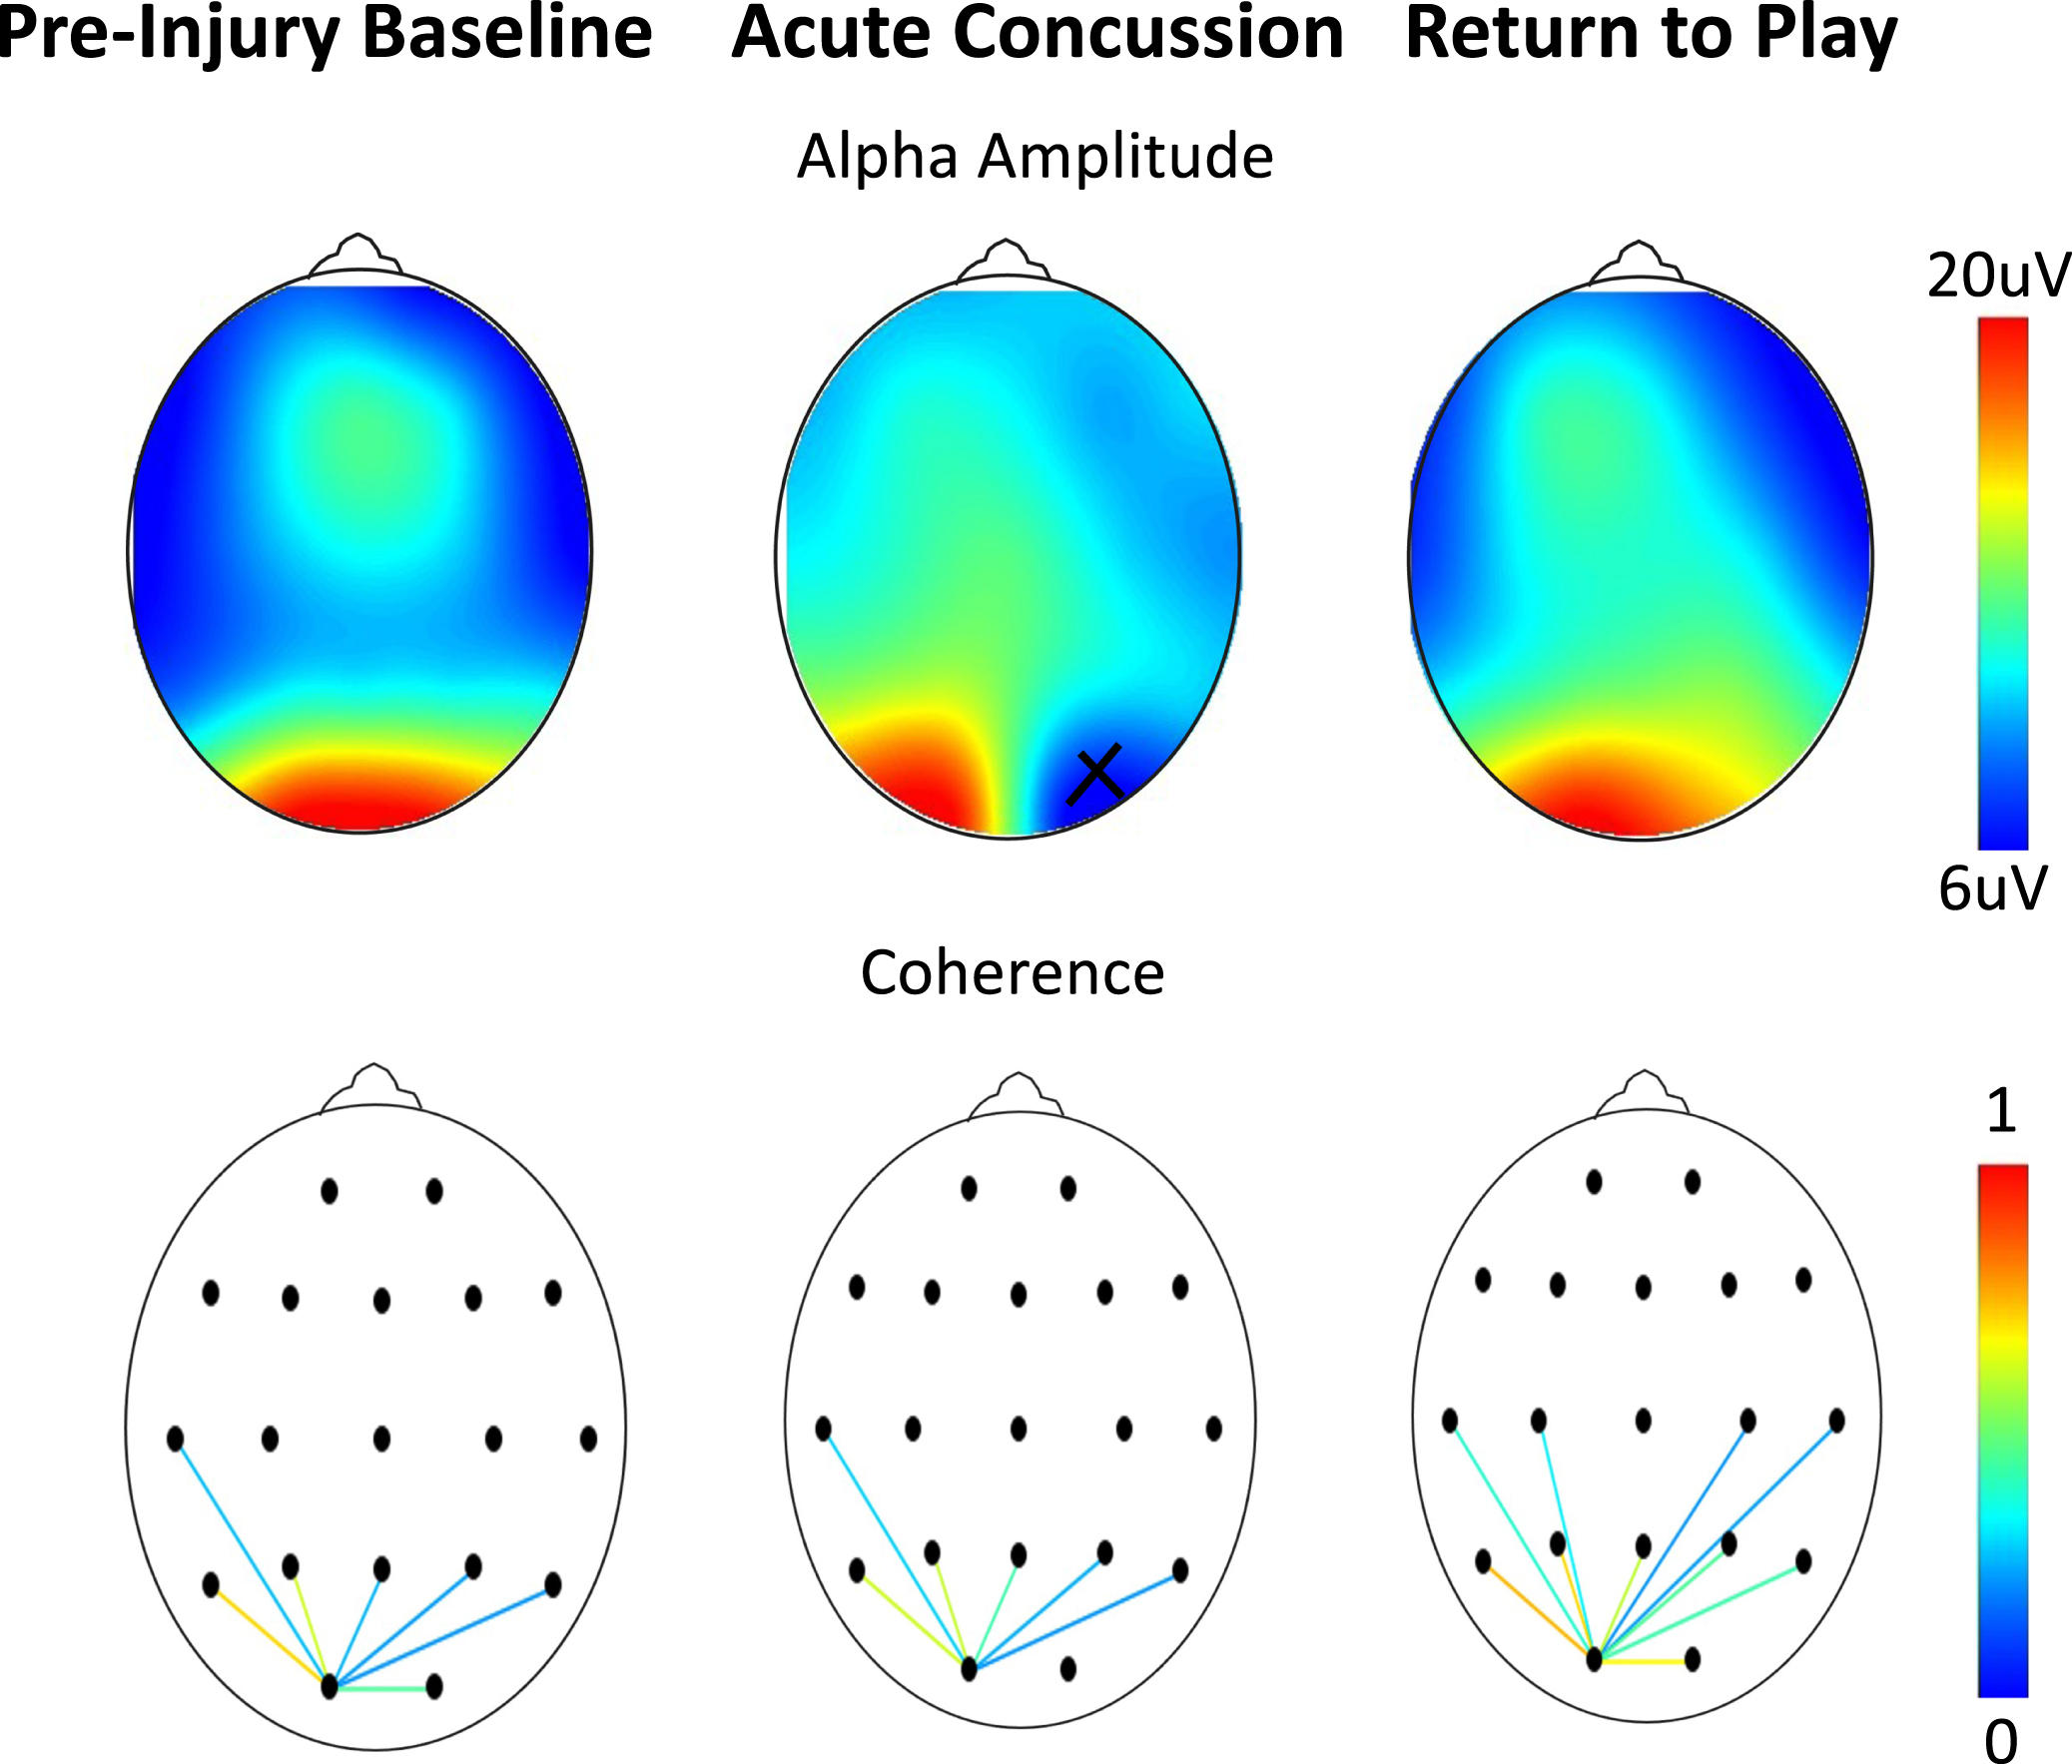 Assessments as a function of scalp location on an athlete at baseline, 48 hours after a concussion, and after symptom resolution one month later. (Top) Alpha amplitude (x = bad channel). (Bottom) Occipital connectivity (from O1 electrode, display threshold = 0.2). As per Table 2, no differences are seen in either the frequency or coherence.